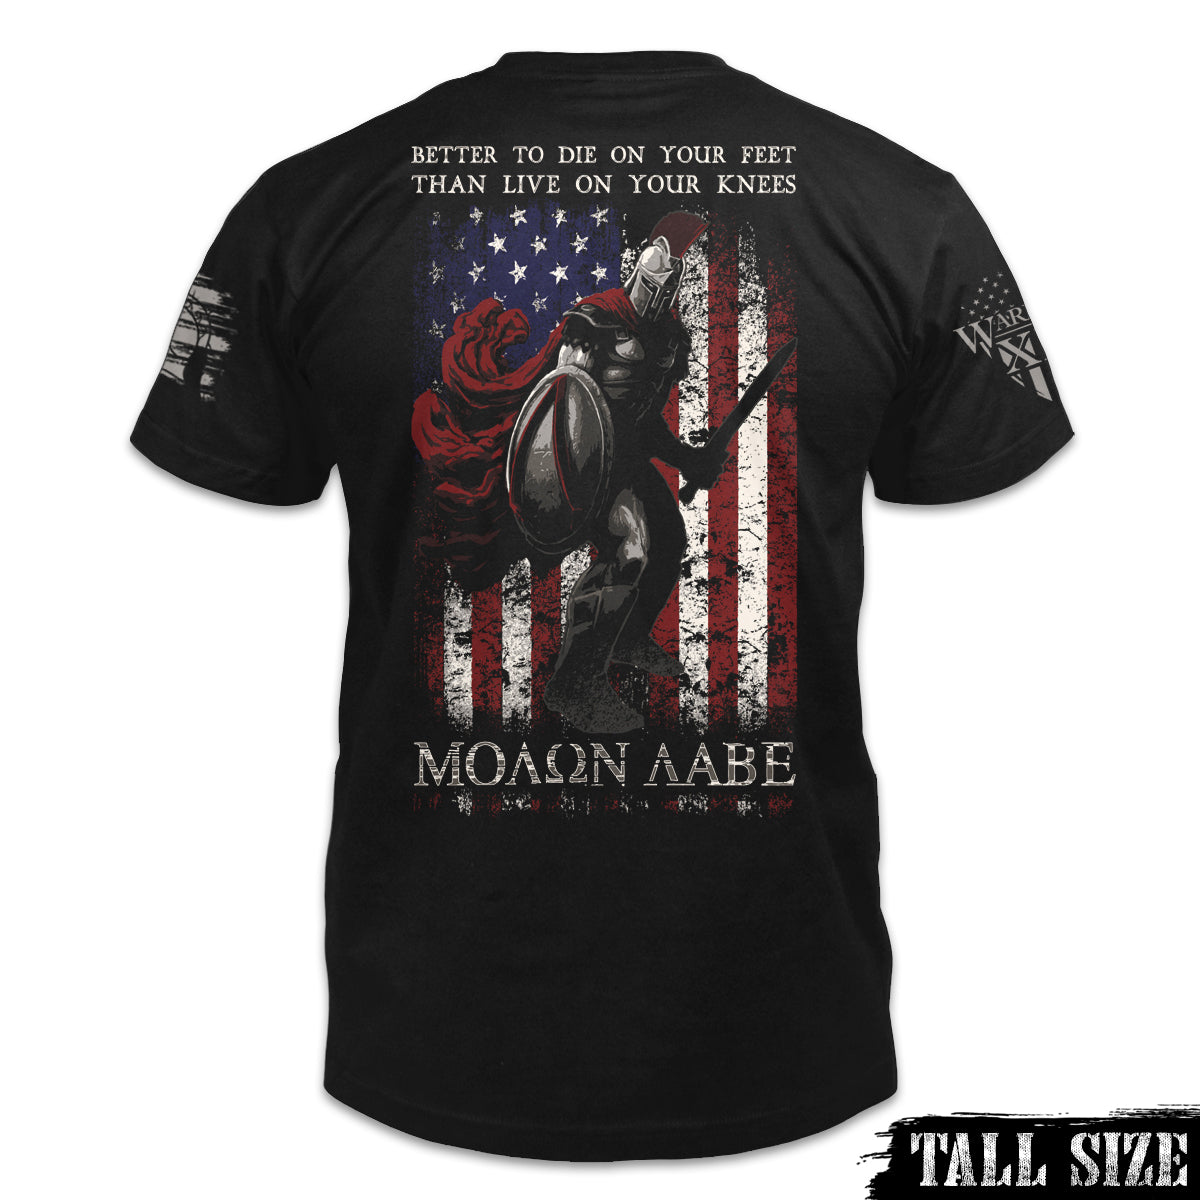 A black tall size shirt with the words "Better To Die On Your Feet Than Live On Your Knees, "MOLON LABE" with a spartan in front of the USA flag printed on the shirt.